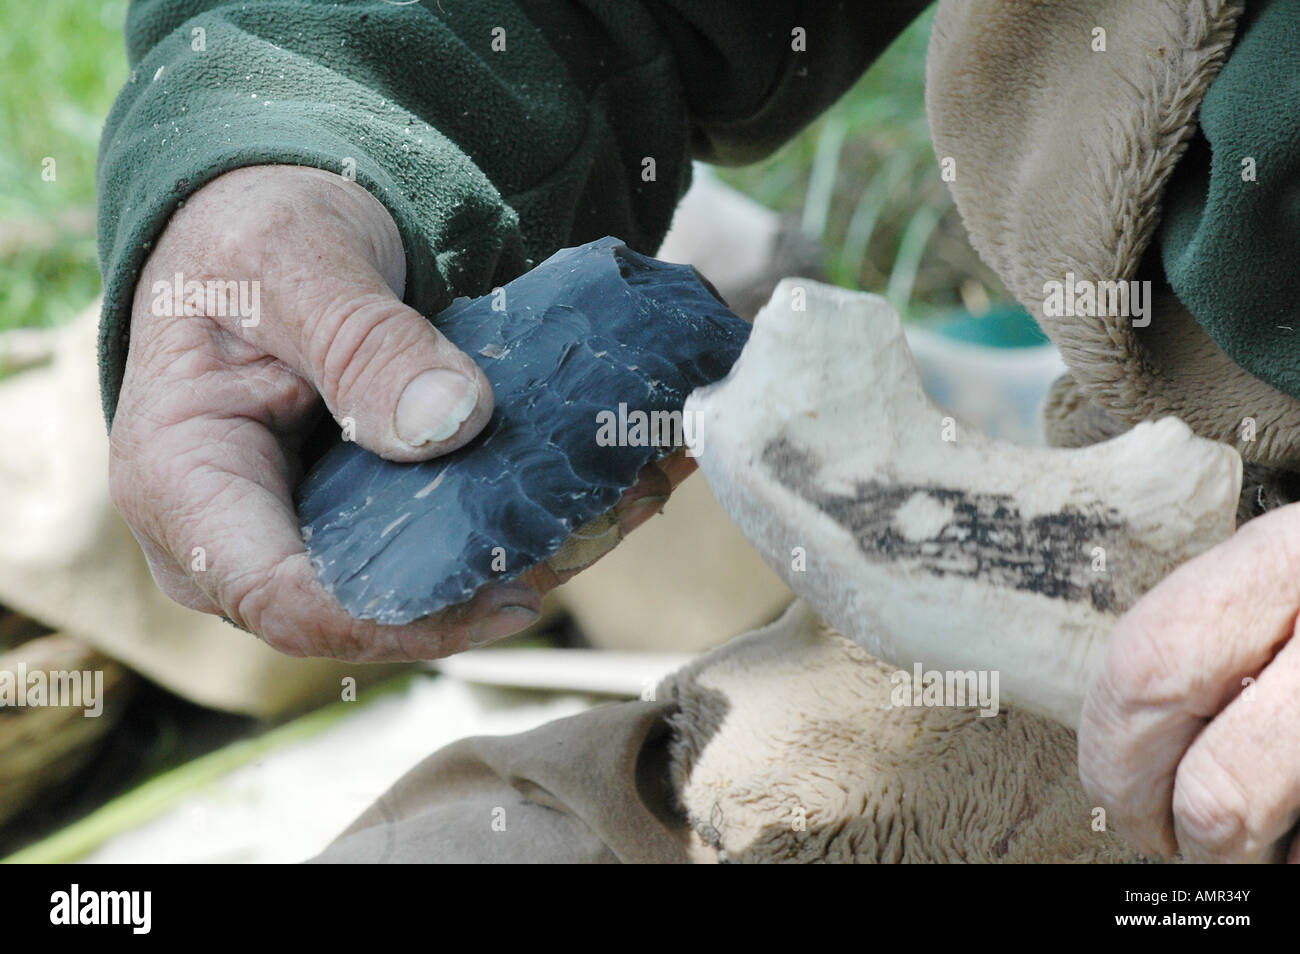 Flint knapper at work on a tool with an antler as the hammer. Stock Photo